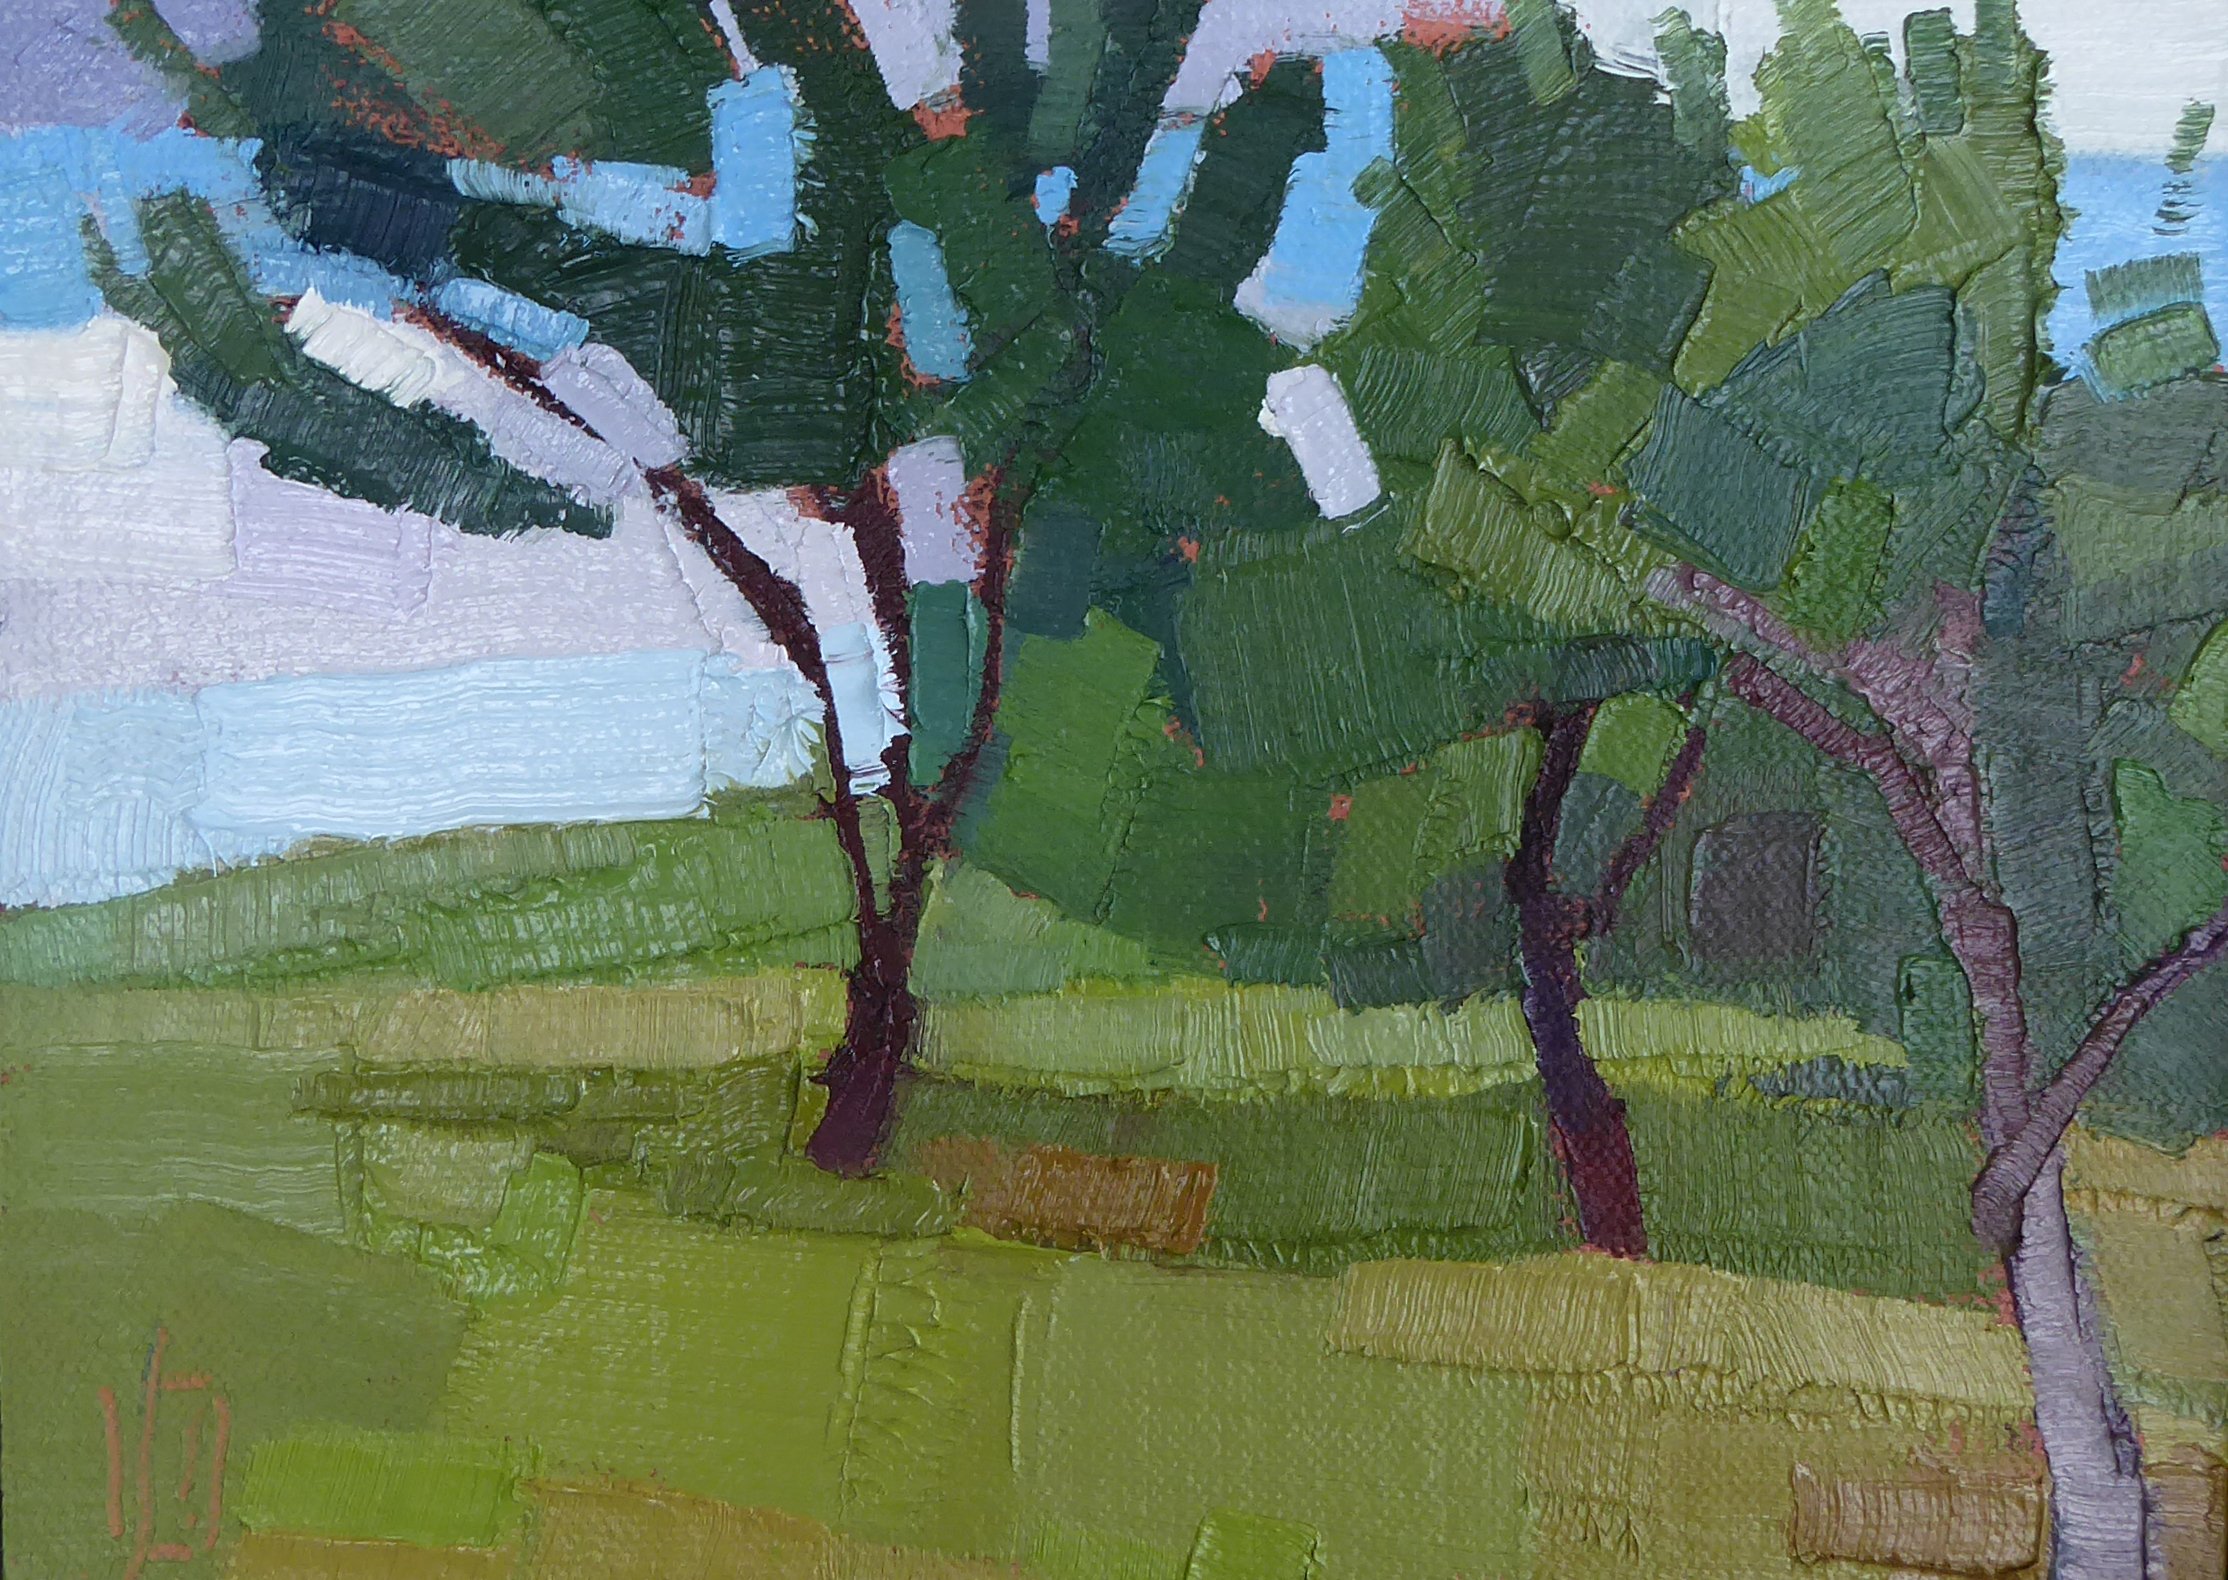   On A Hill  6 x 8 oil on linen   Islesford Artists   